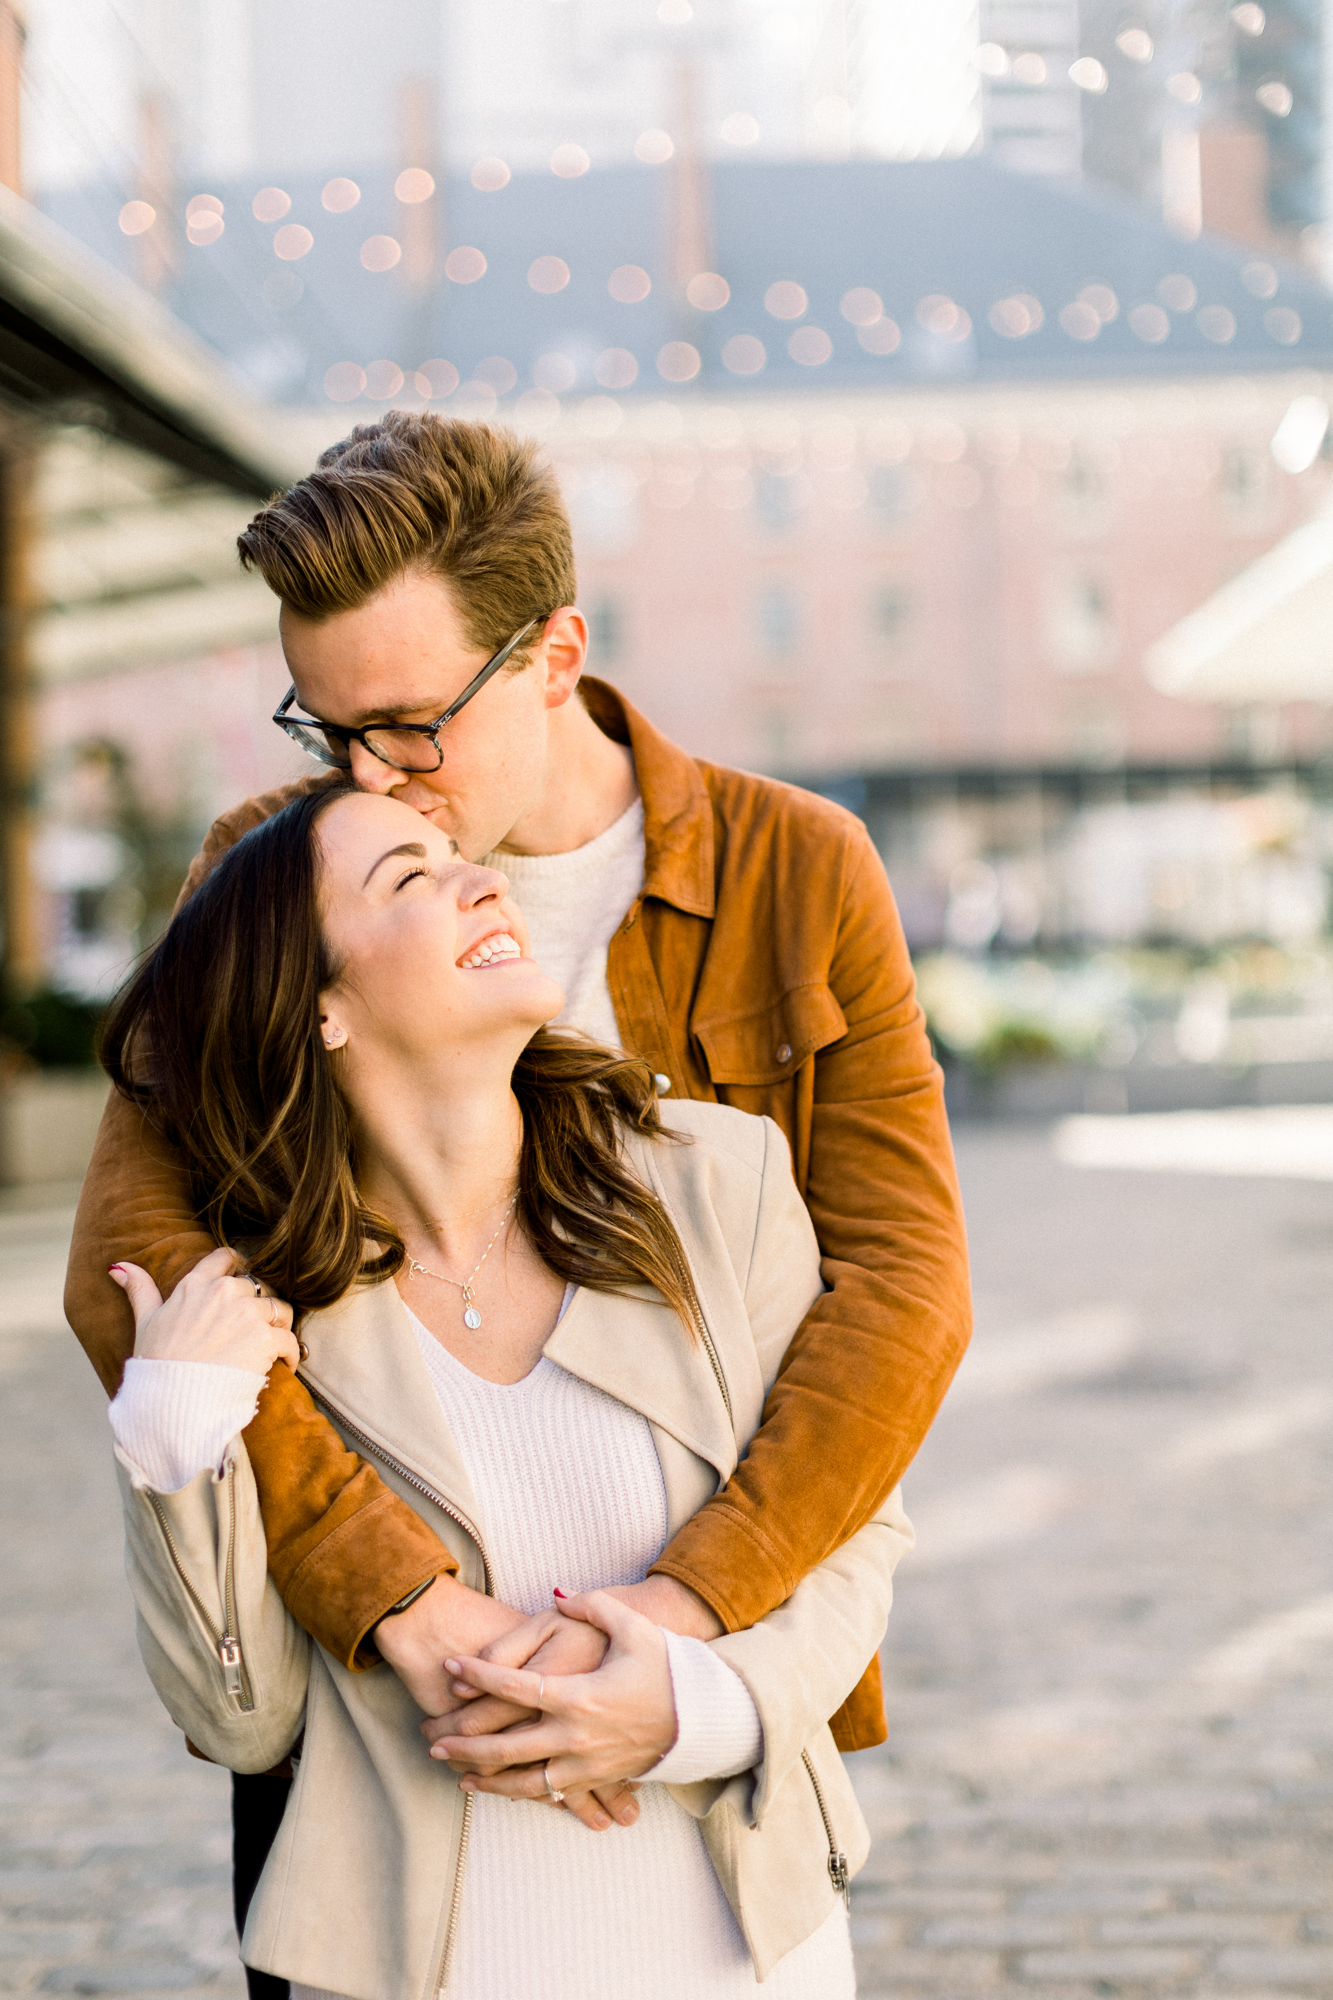 Picturesque Fall Engagement Photos on South Street Near New York's Pier 17